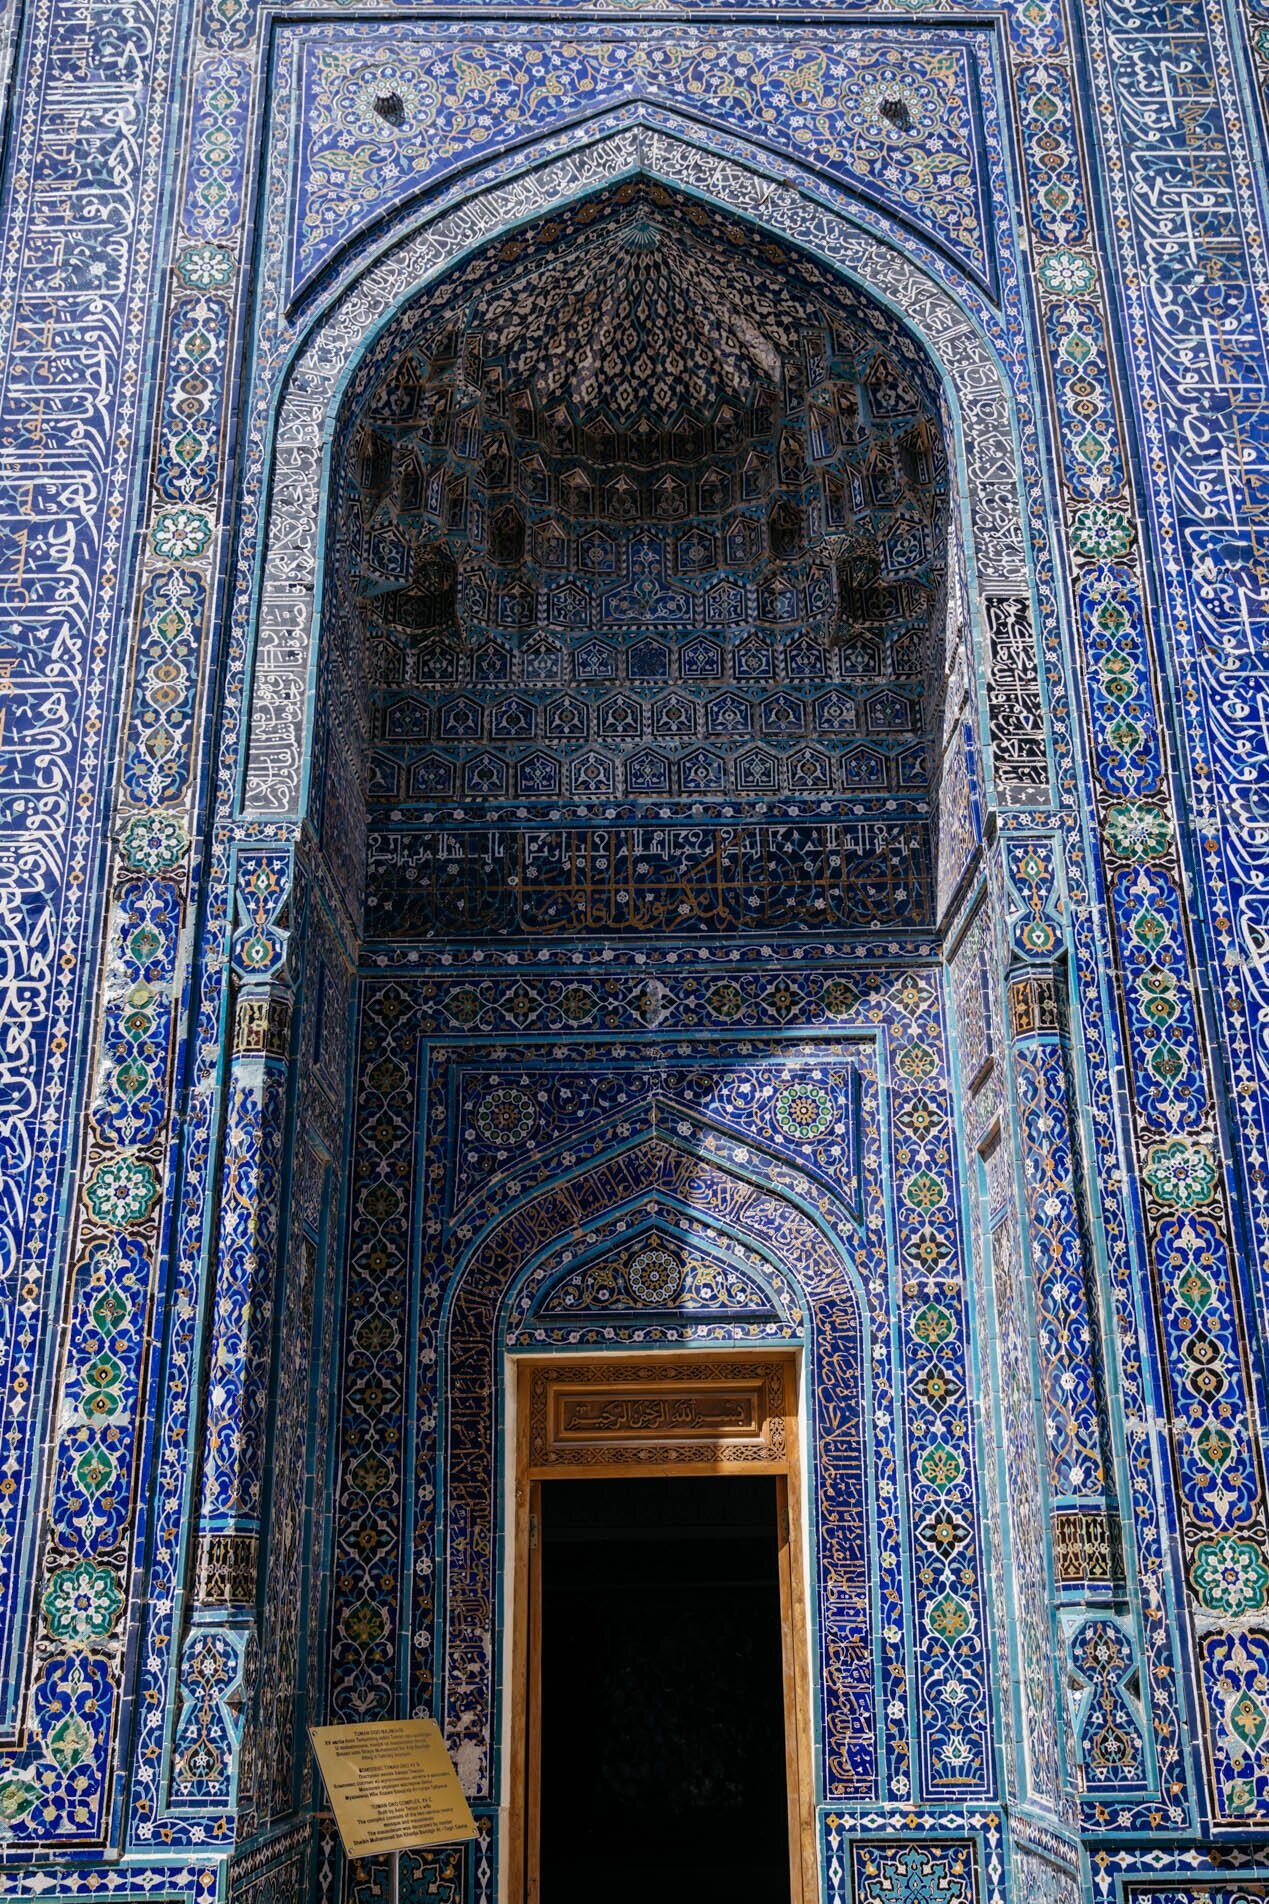  Details from the Shah-i-Zinda tomb complex, Samarkand 